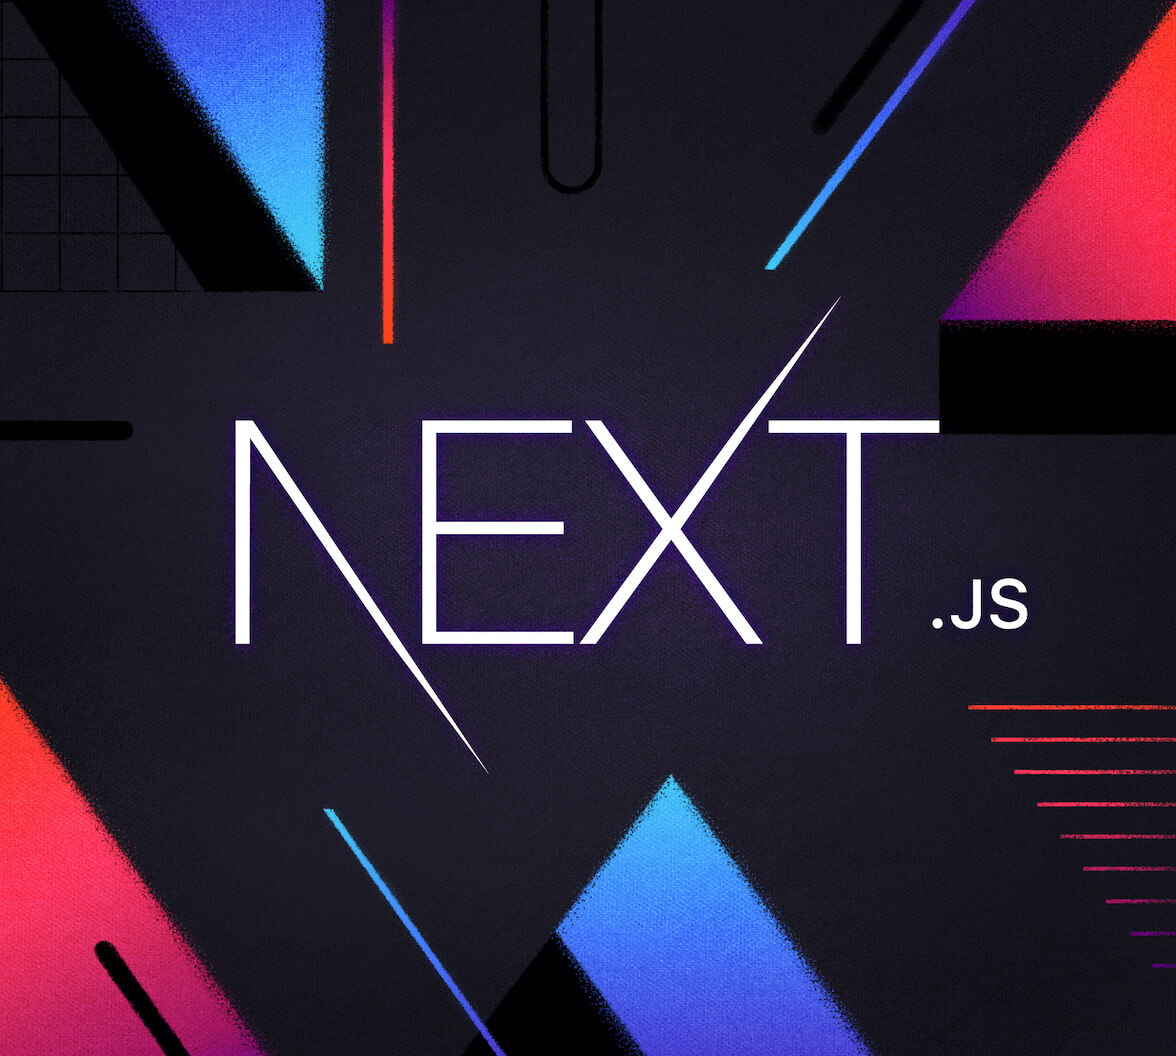 Next Js for React developers